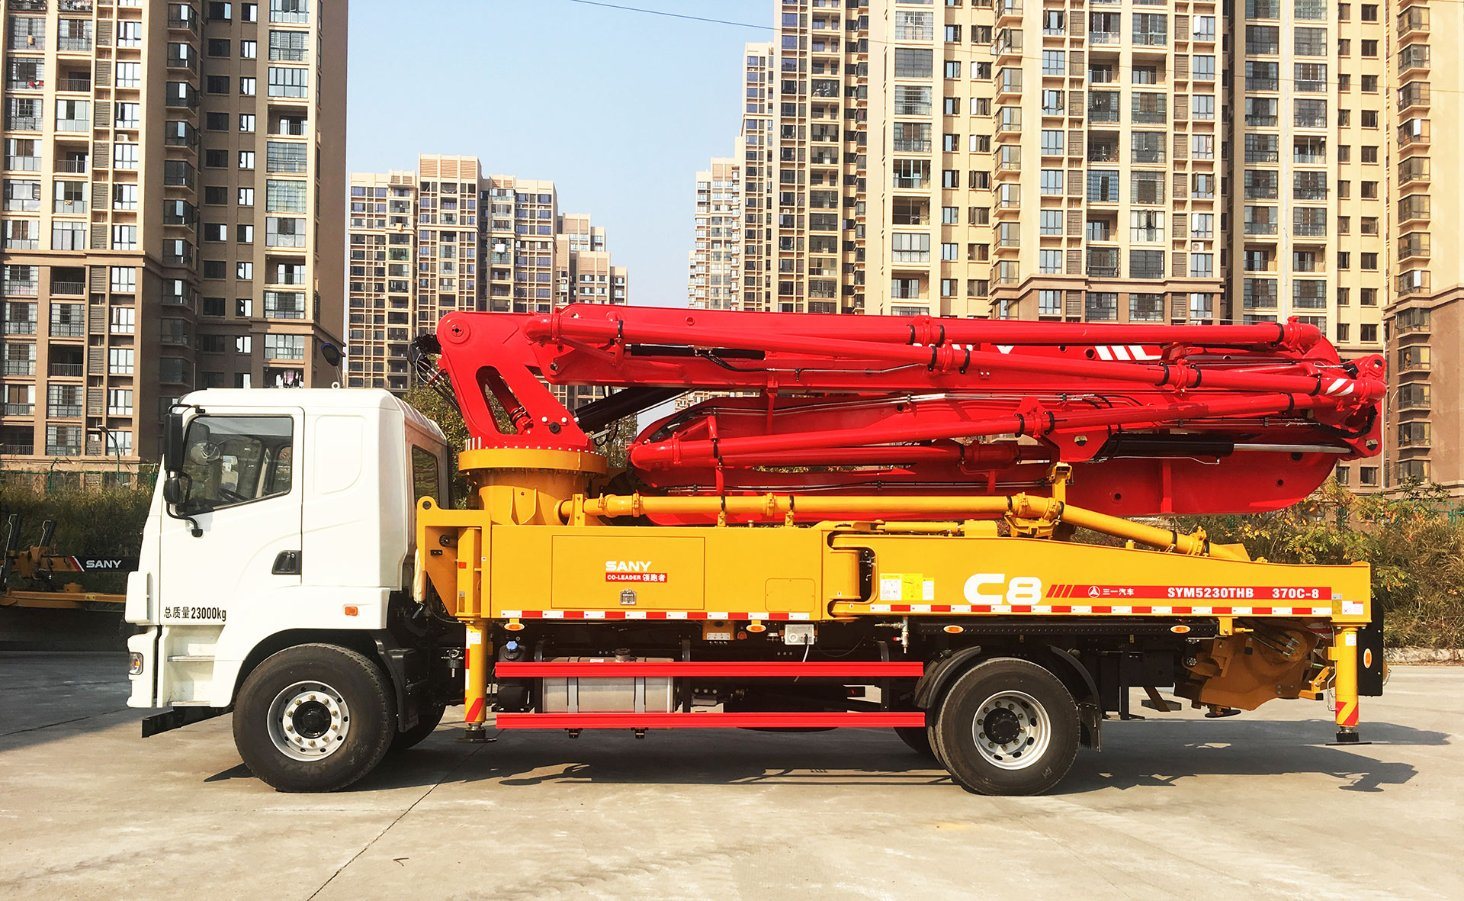 37m Concrete Pump Truck Sym5230thb370c with Competitive Price